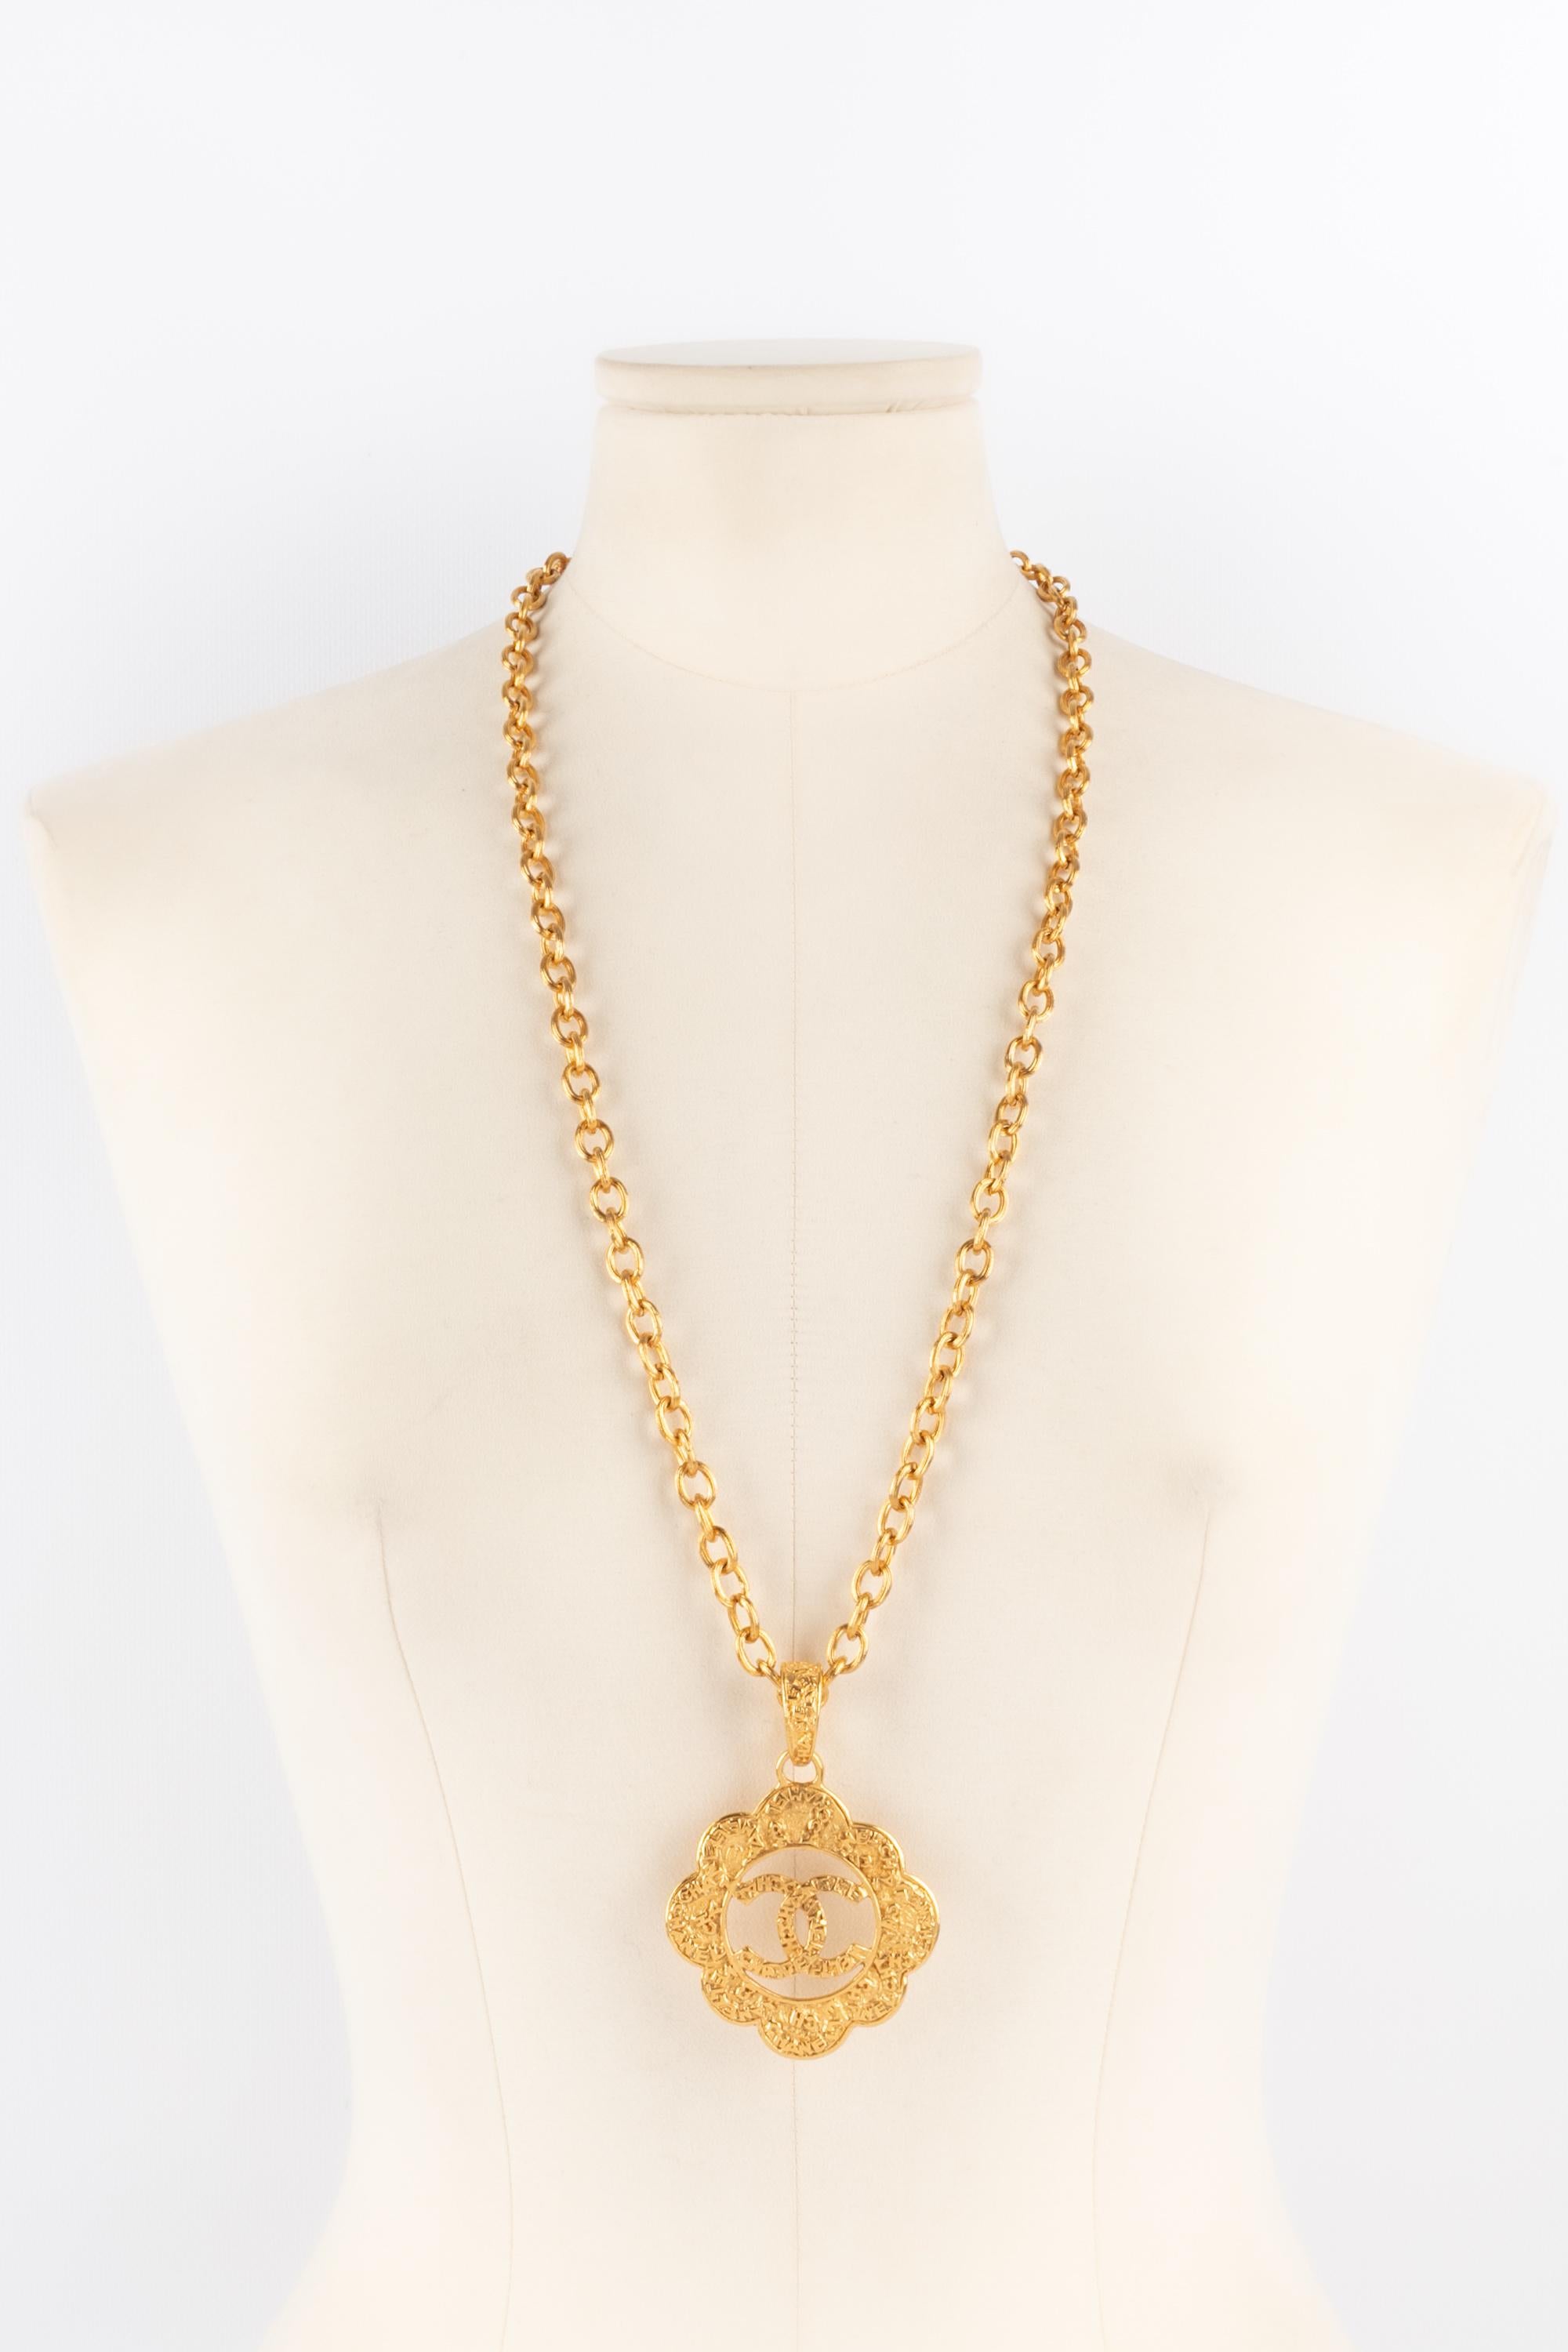 CHANEL - (Made in France) Golden metal pendant necklace. 1995 Fall-Winter Ready-to-Wear Collection.

Condition:
Very good condition

Dimensions:
Length: 75 cm - Pendant: about 5 cm

CB260